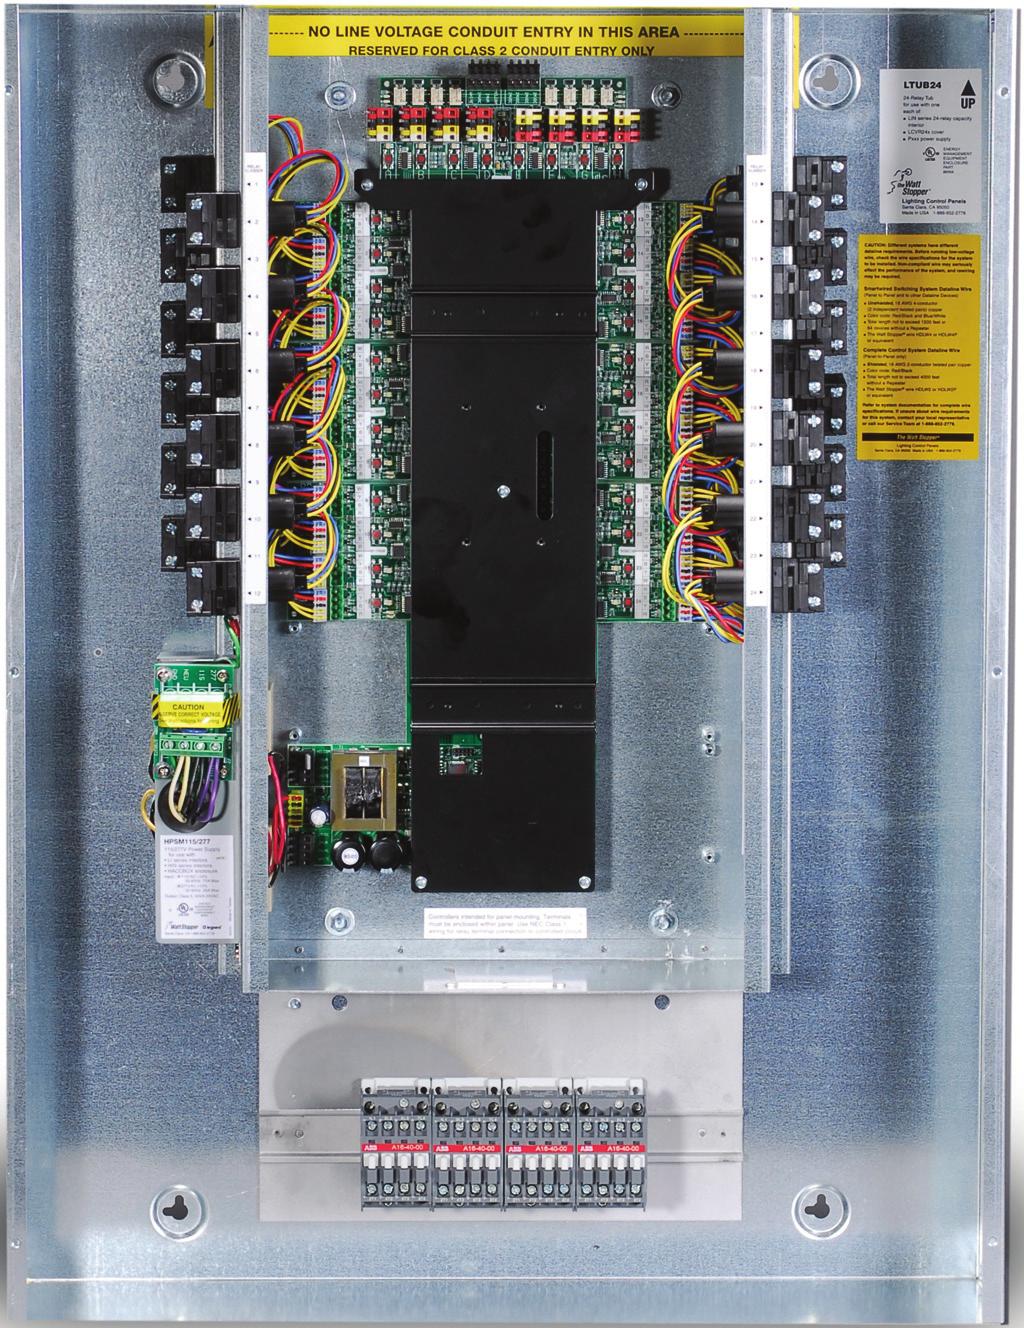 COMPONENT LOCATIONS The illustration below shows a Lighting Integrator panel installed inside an enclosure with the cover removed. Note the location of components when the panel is fully assembled.